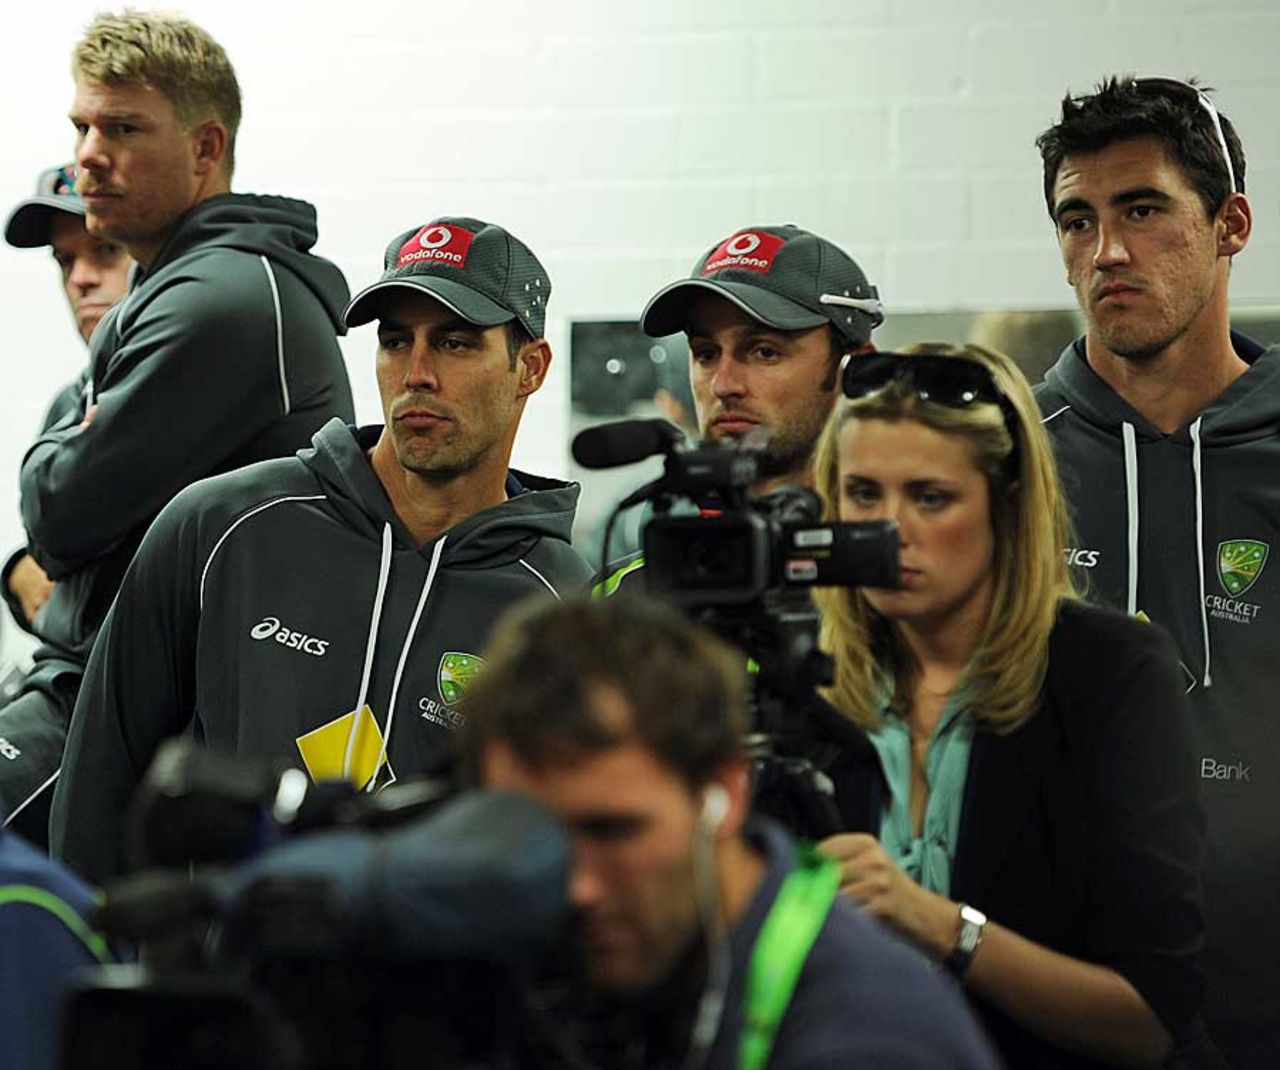 David Warner, Mitchell Johnson, Nathan Lyon and Mitchell Starc look on as Ricky Ponting announces his retirement, Perth, November 29, 2012